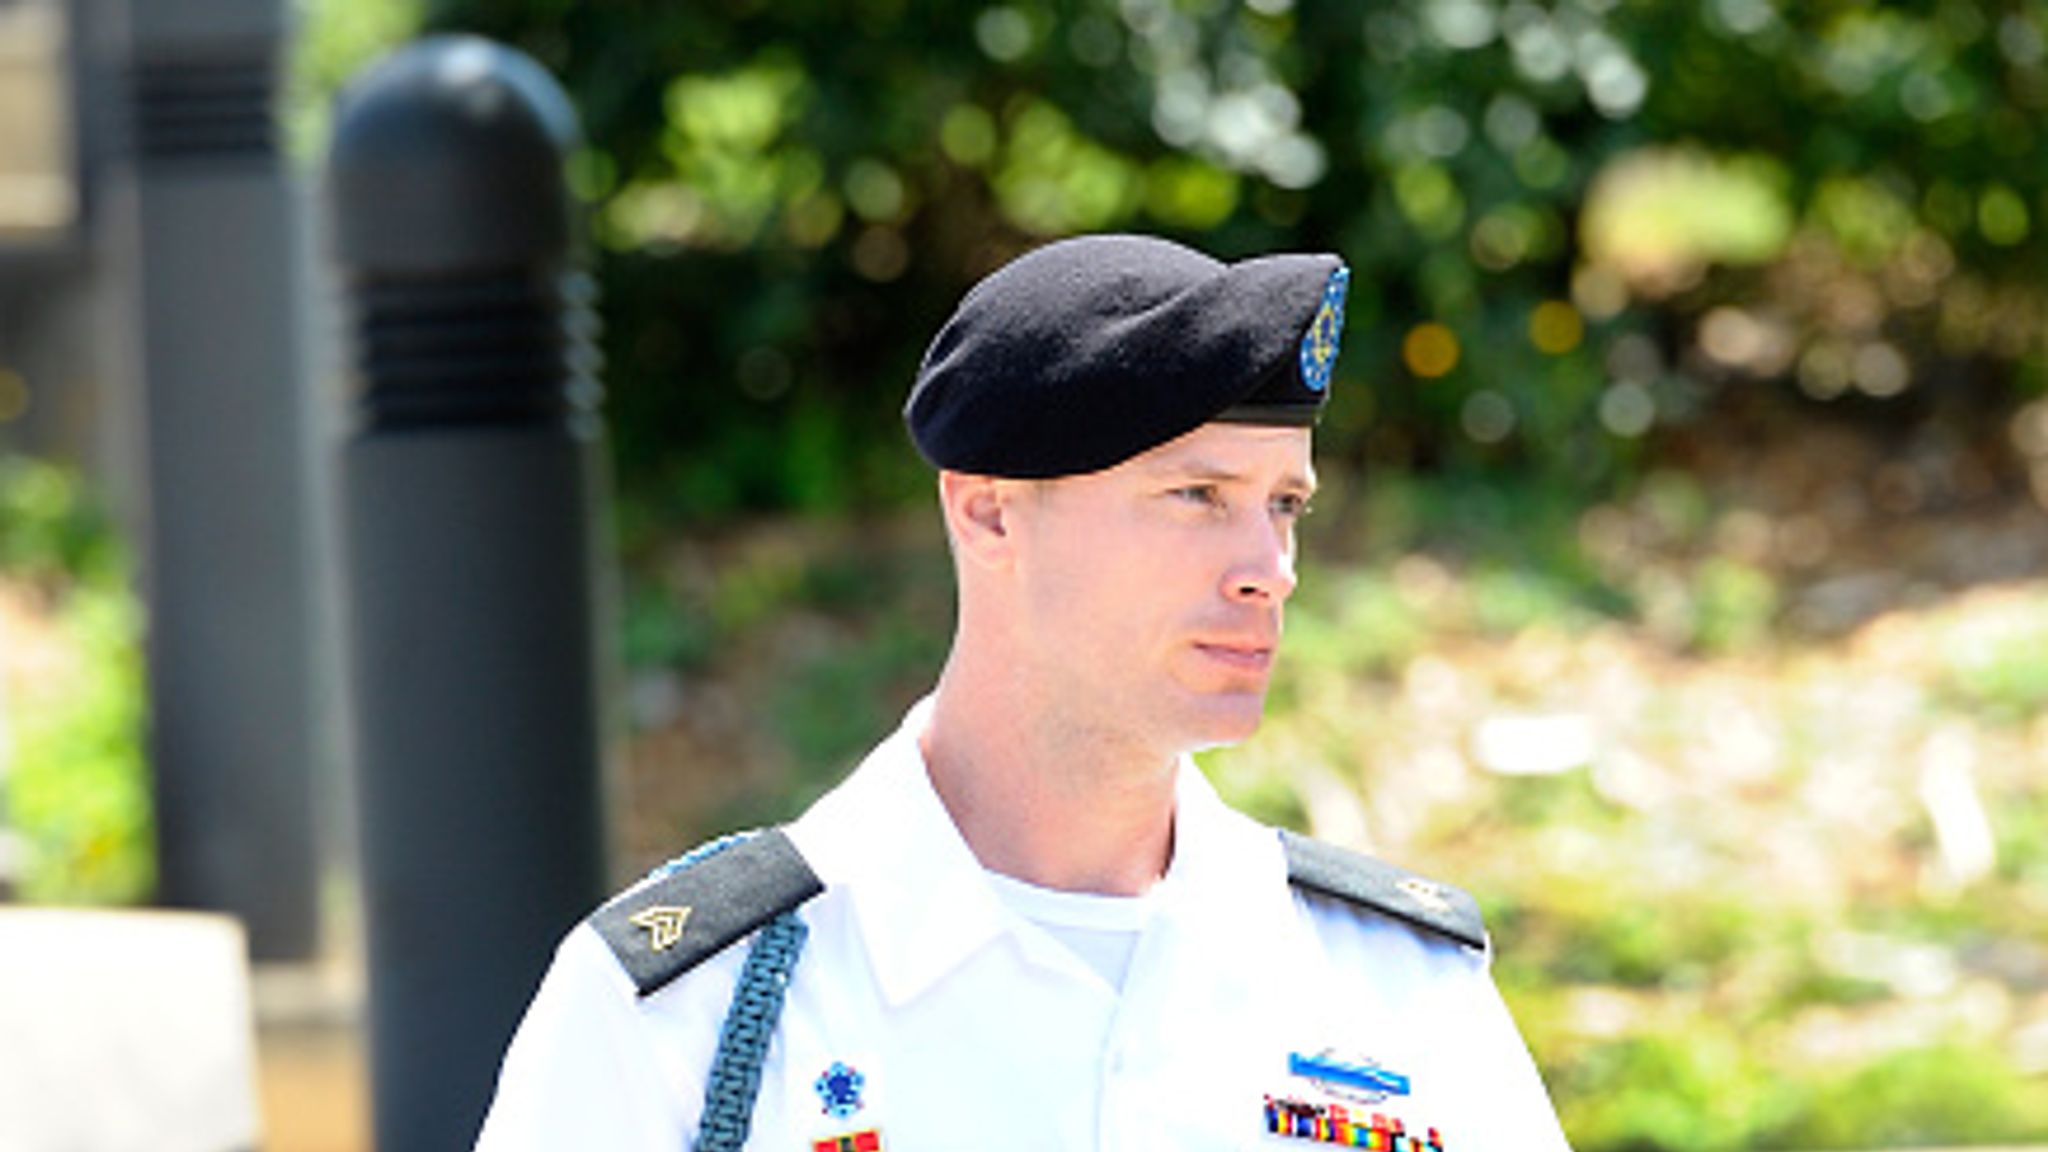 Bowe Bergdahl seeks pardon from Obama before Trump takes office World